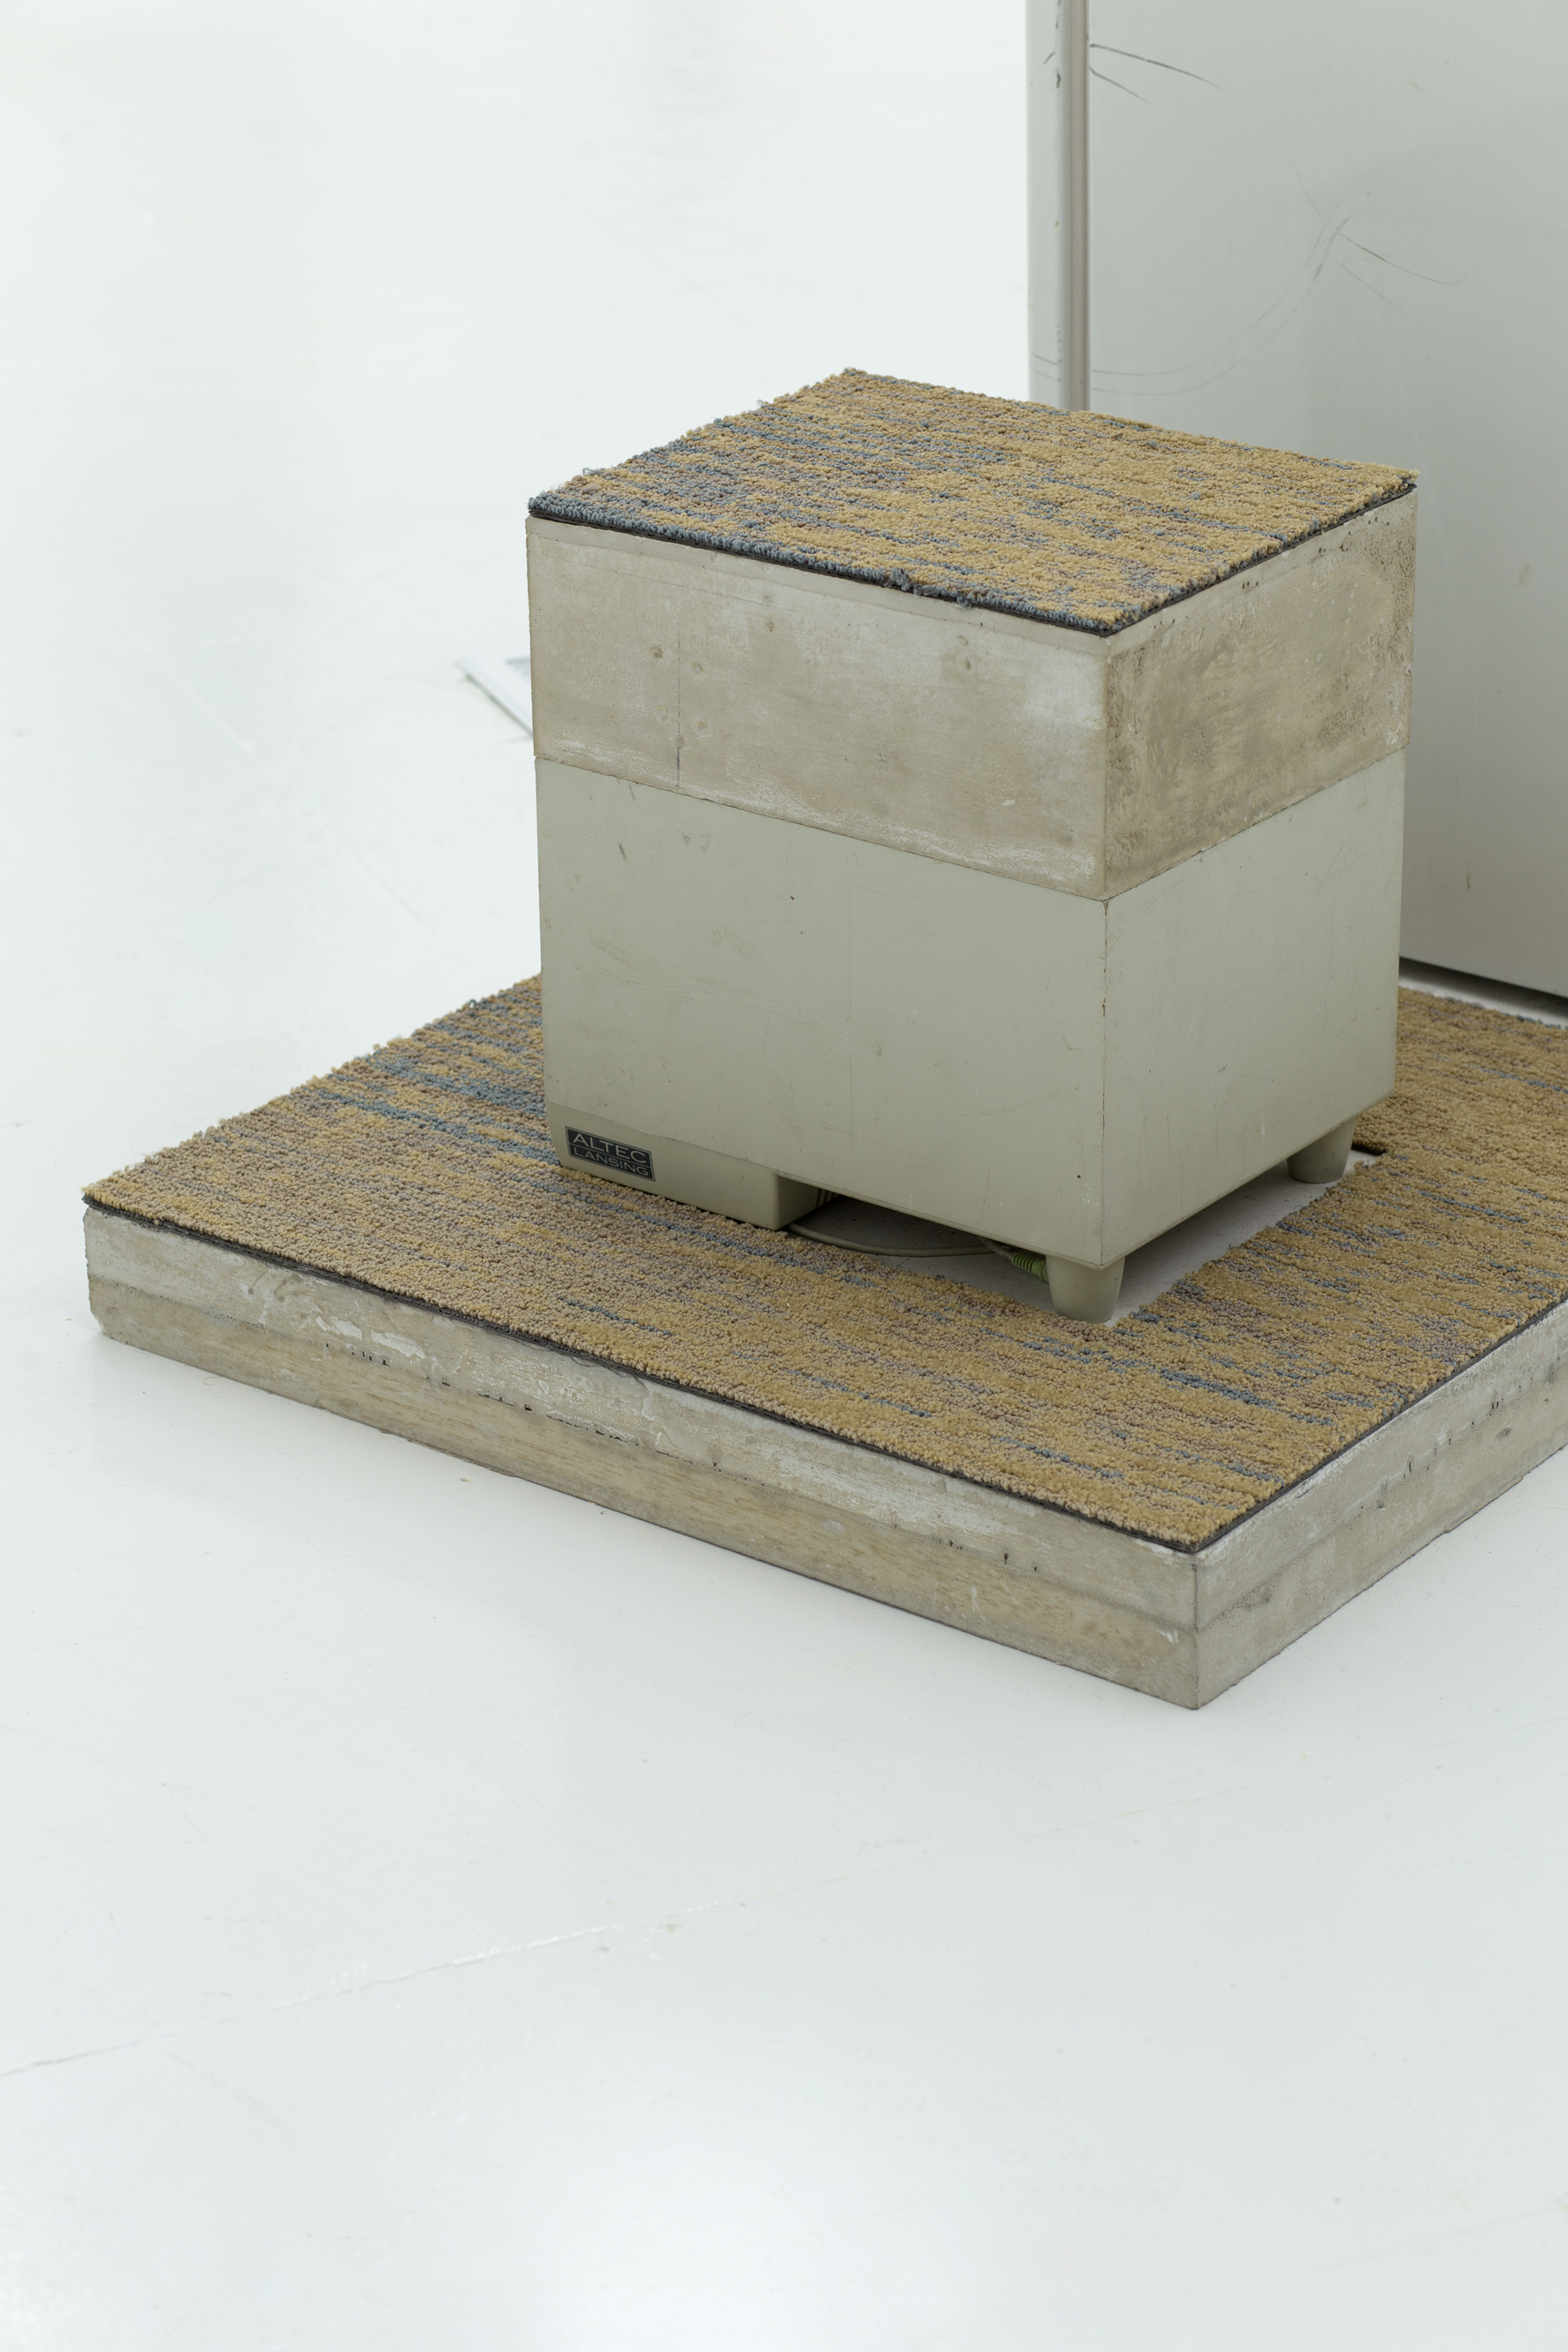 A plastic appliance is topped with concrete and low-pile carpet